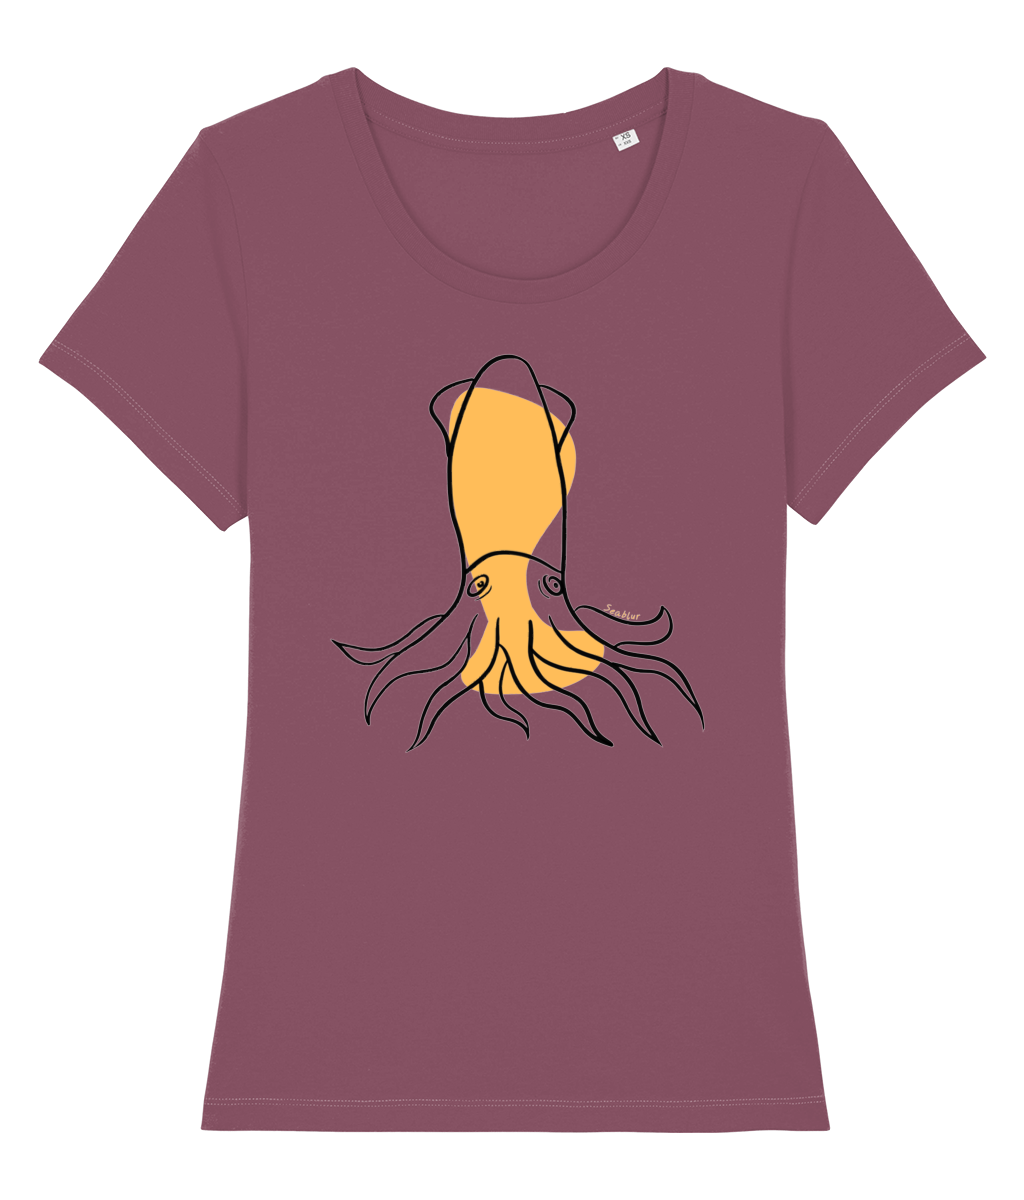 Womens - Squidly